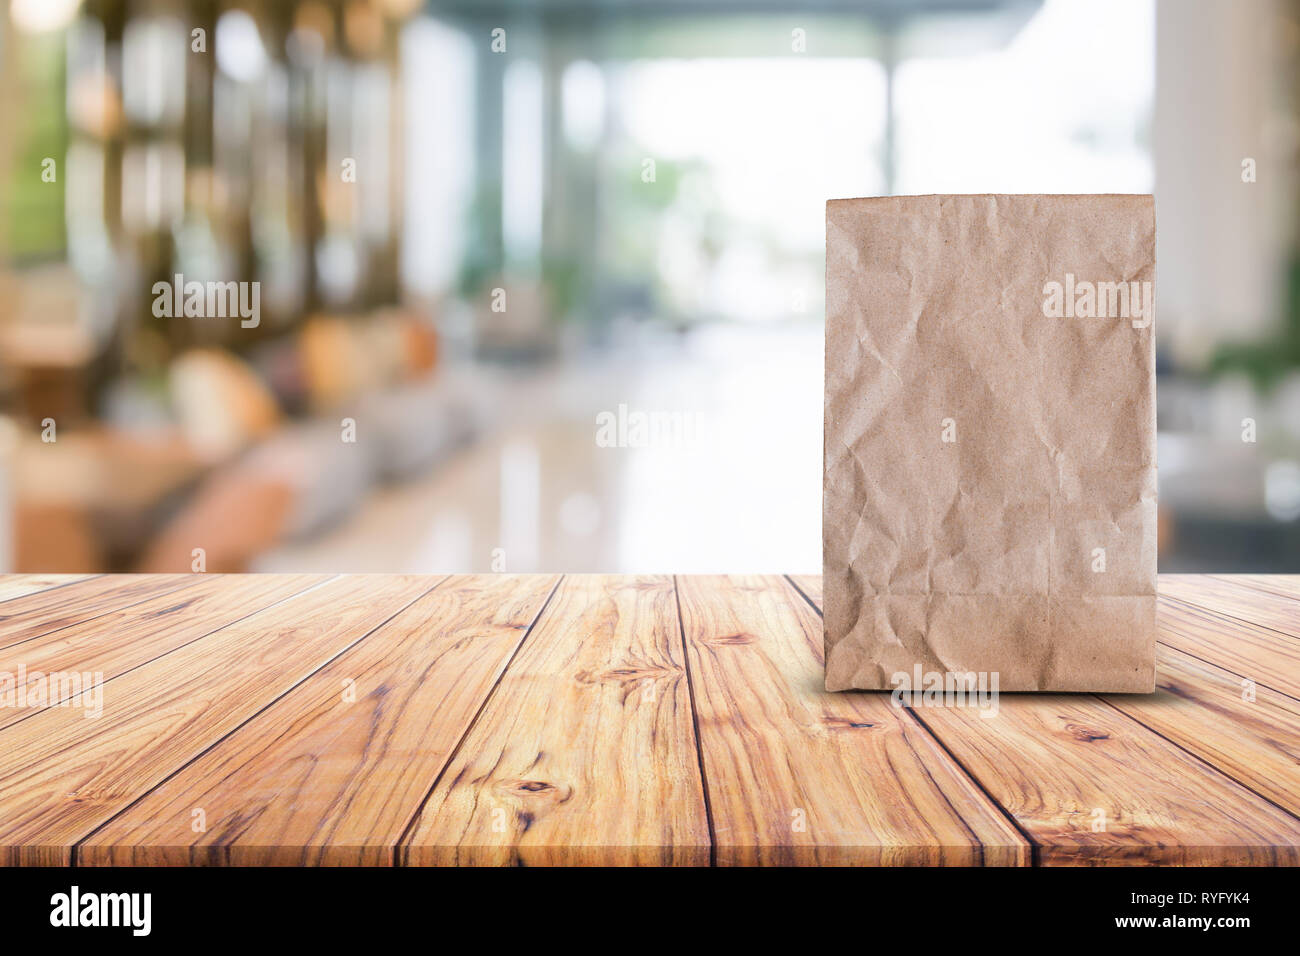 Blank Brown Paper Bag For Taking Away Food On Wood Table Blurred